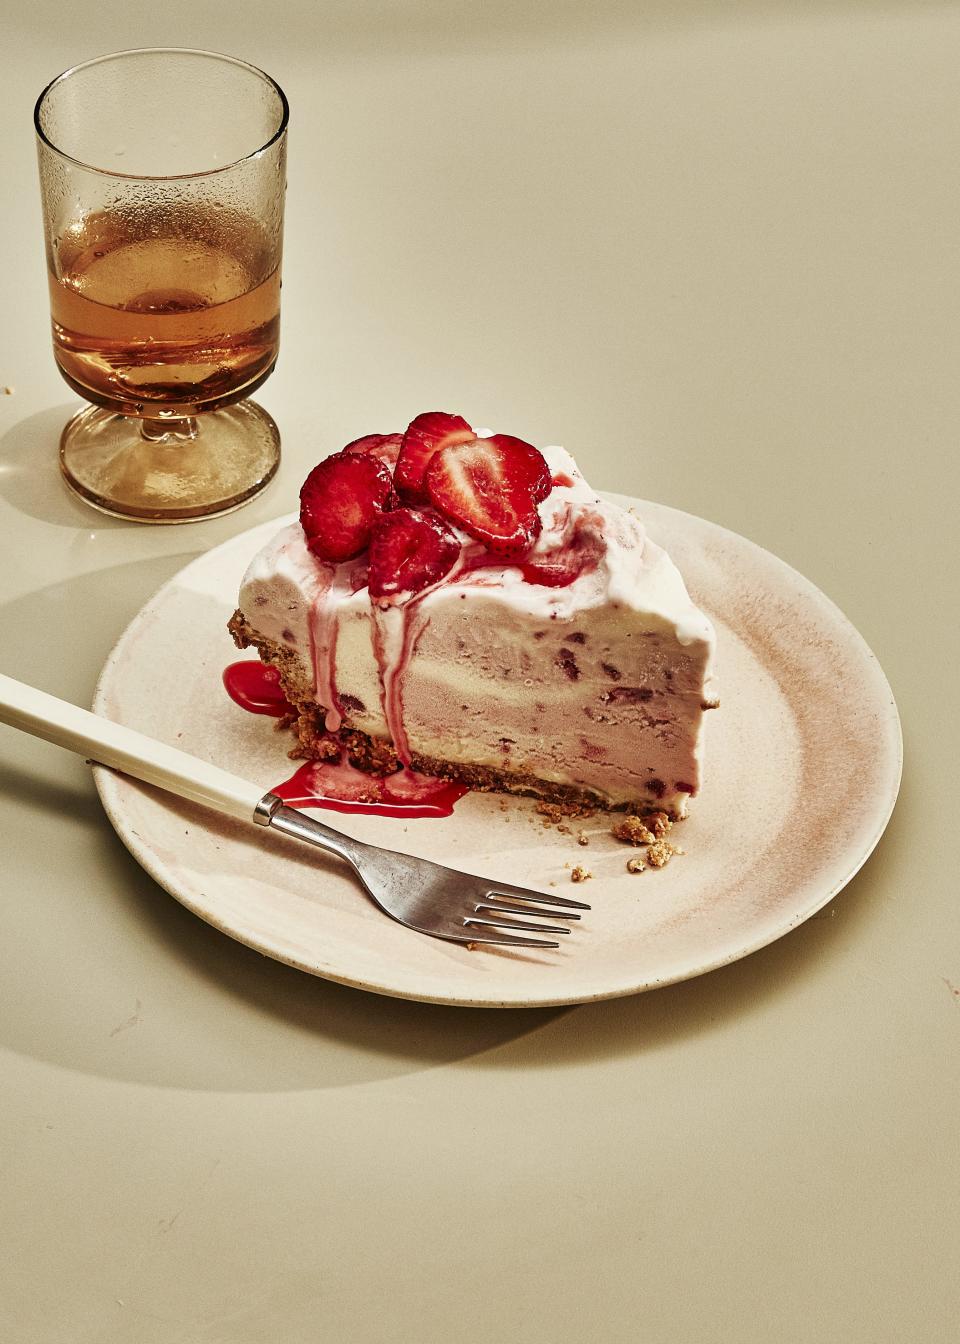 <cite class="credit">Photo by Alex Lau, Food Styling by Alison Attenborough, Prop Styling by Heather Greene</cite>